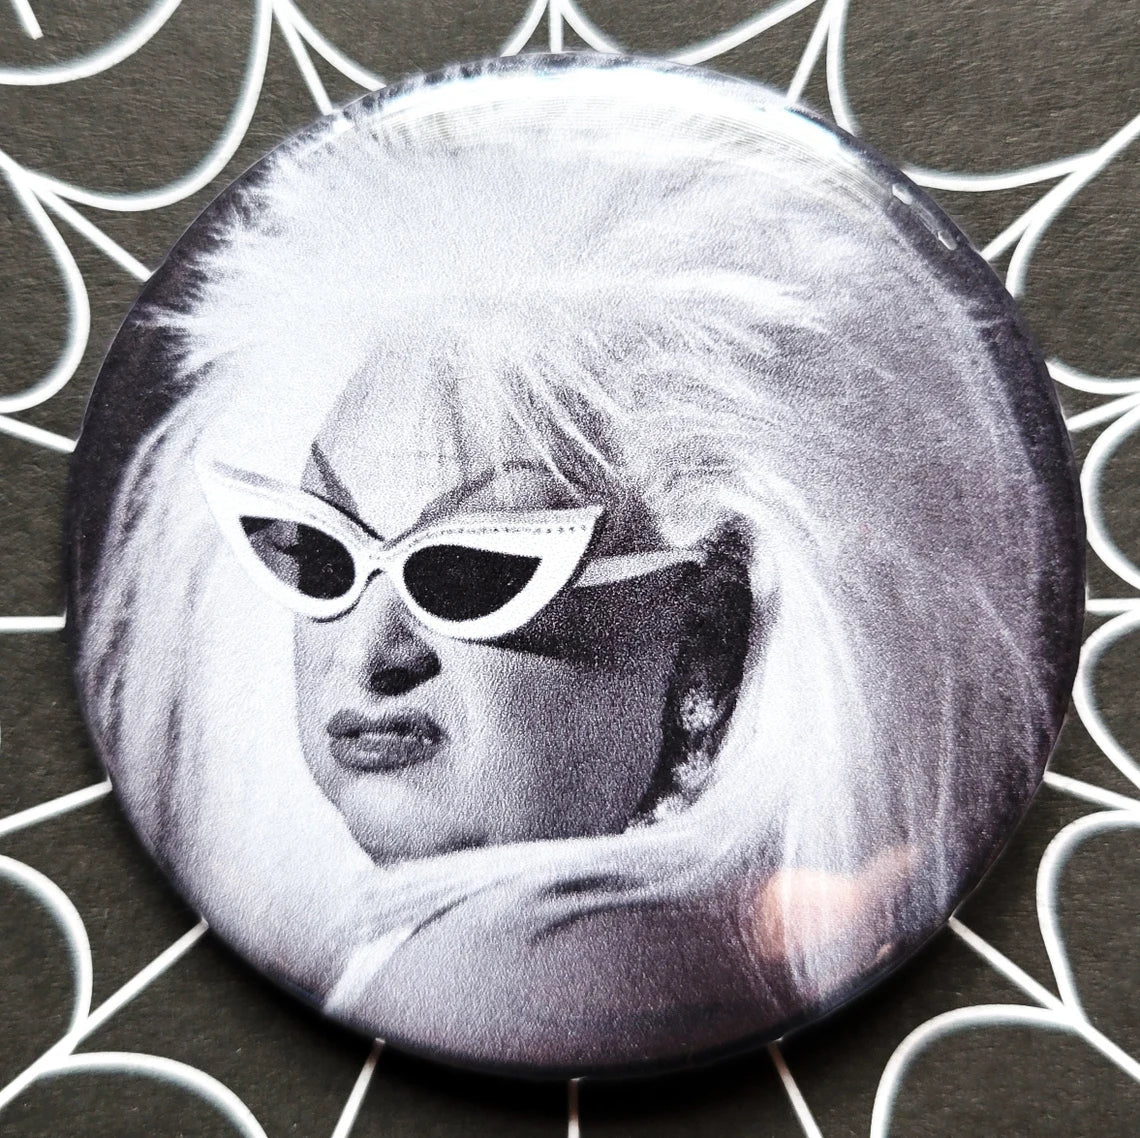 Divine pinback Buttons & Bottle Openers.